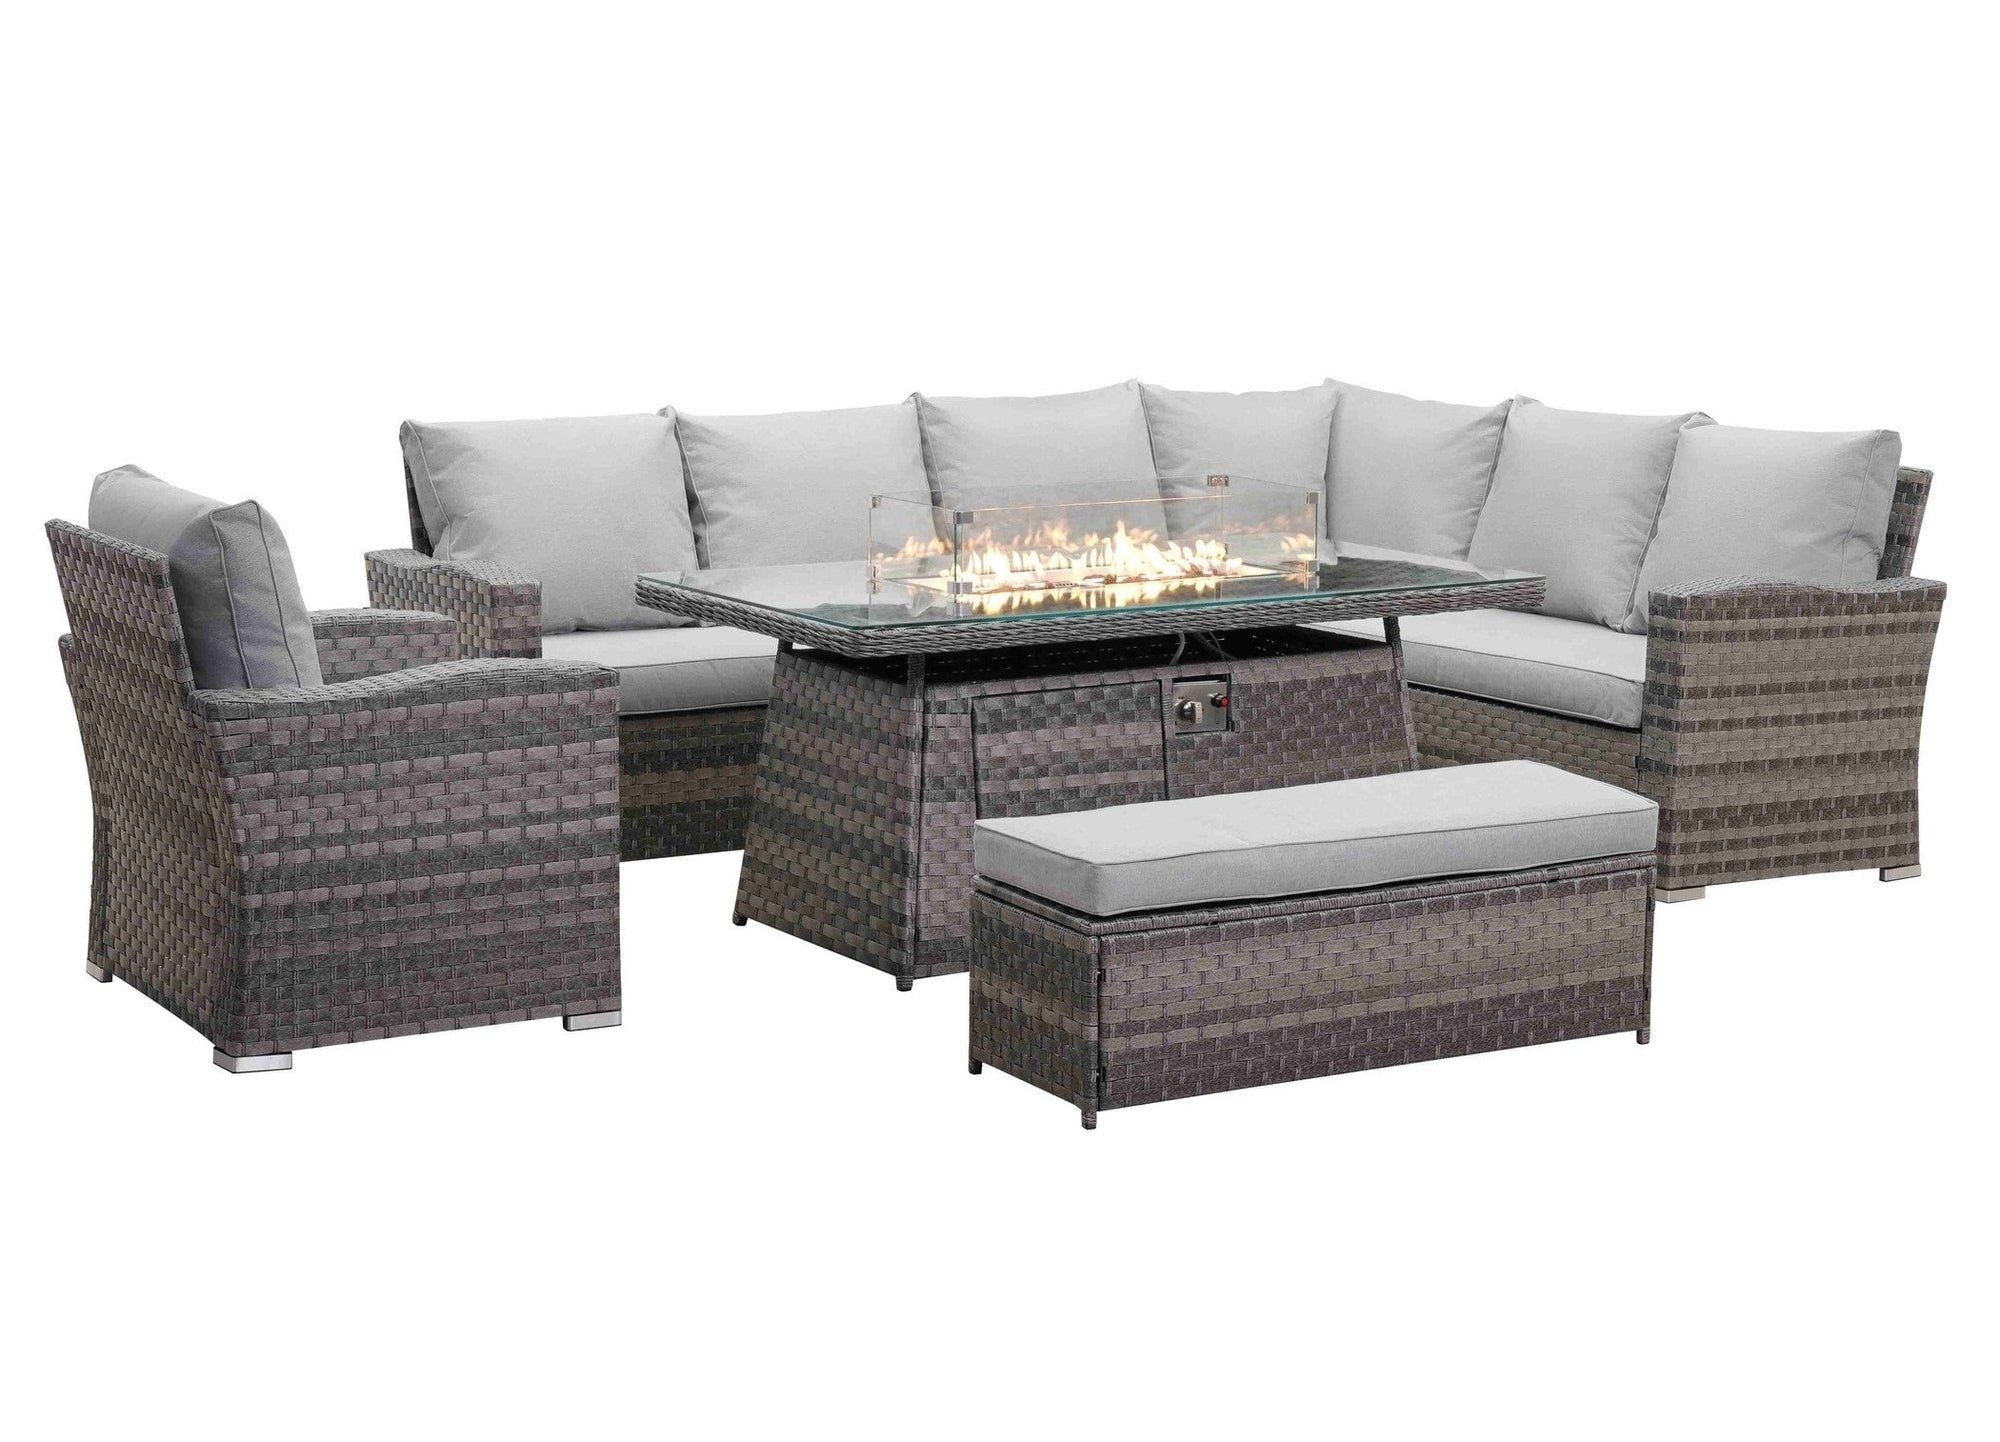 Icon Luxury Rattan Right Hand Corner Sofa Chair Bench and Fire Pit Table - Light Grey Rattan Furniture MaxiFurn 